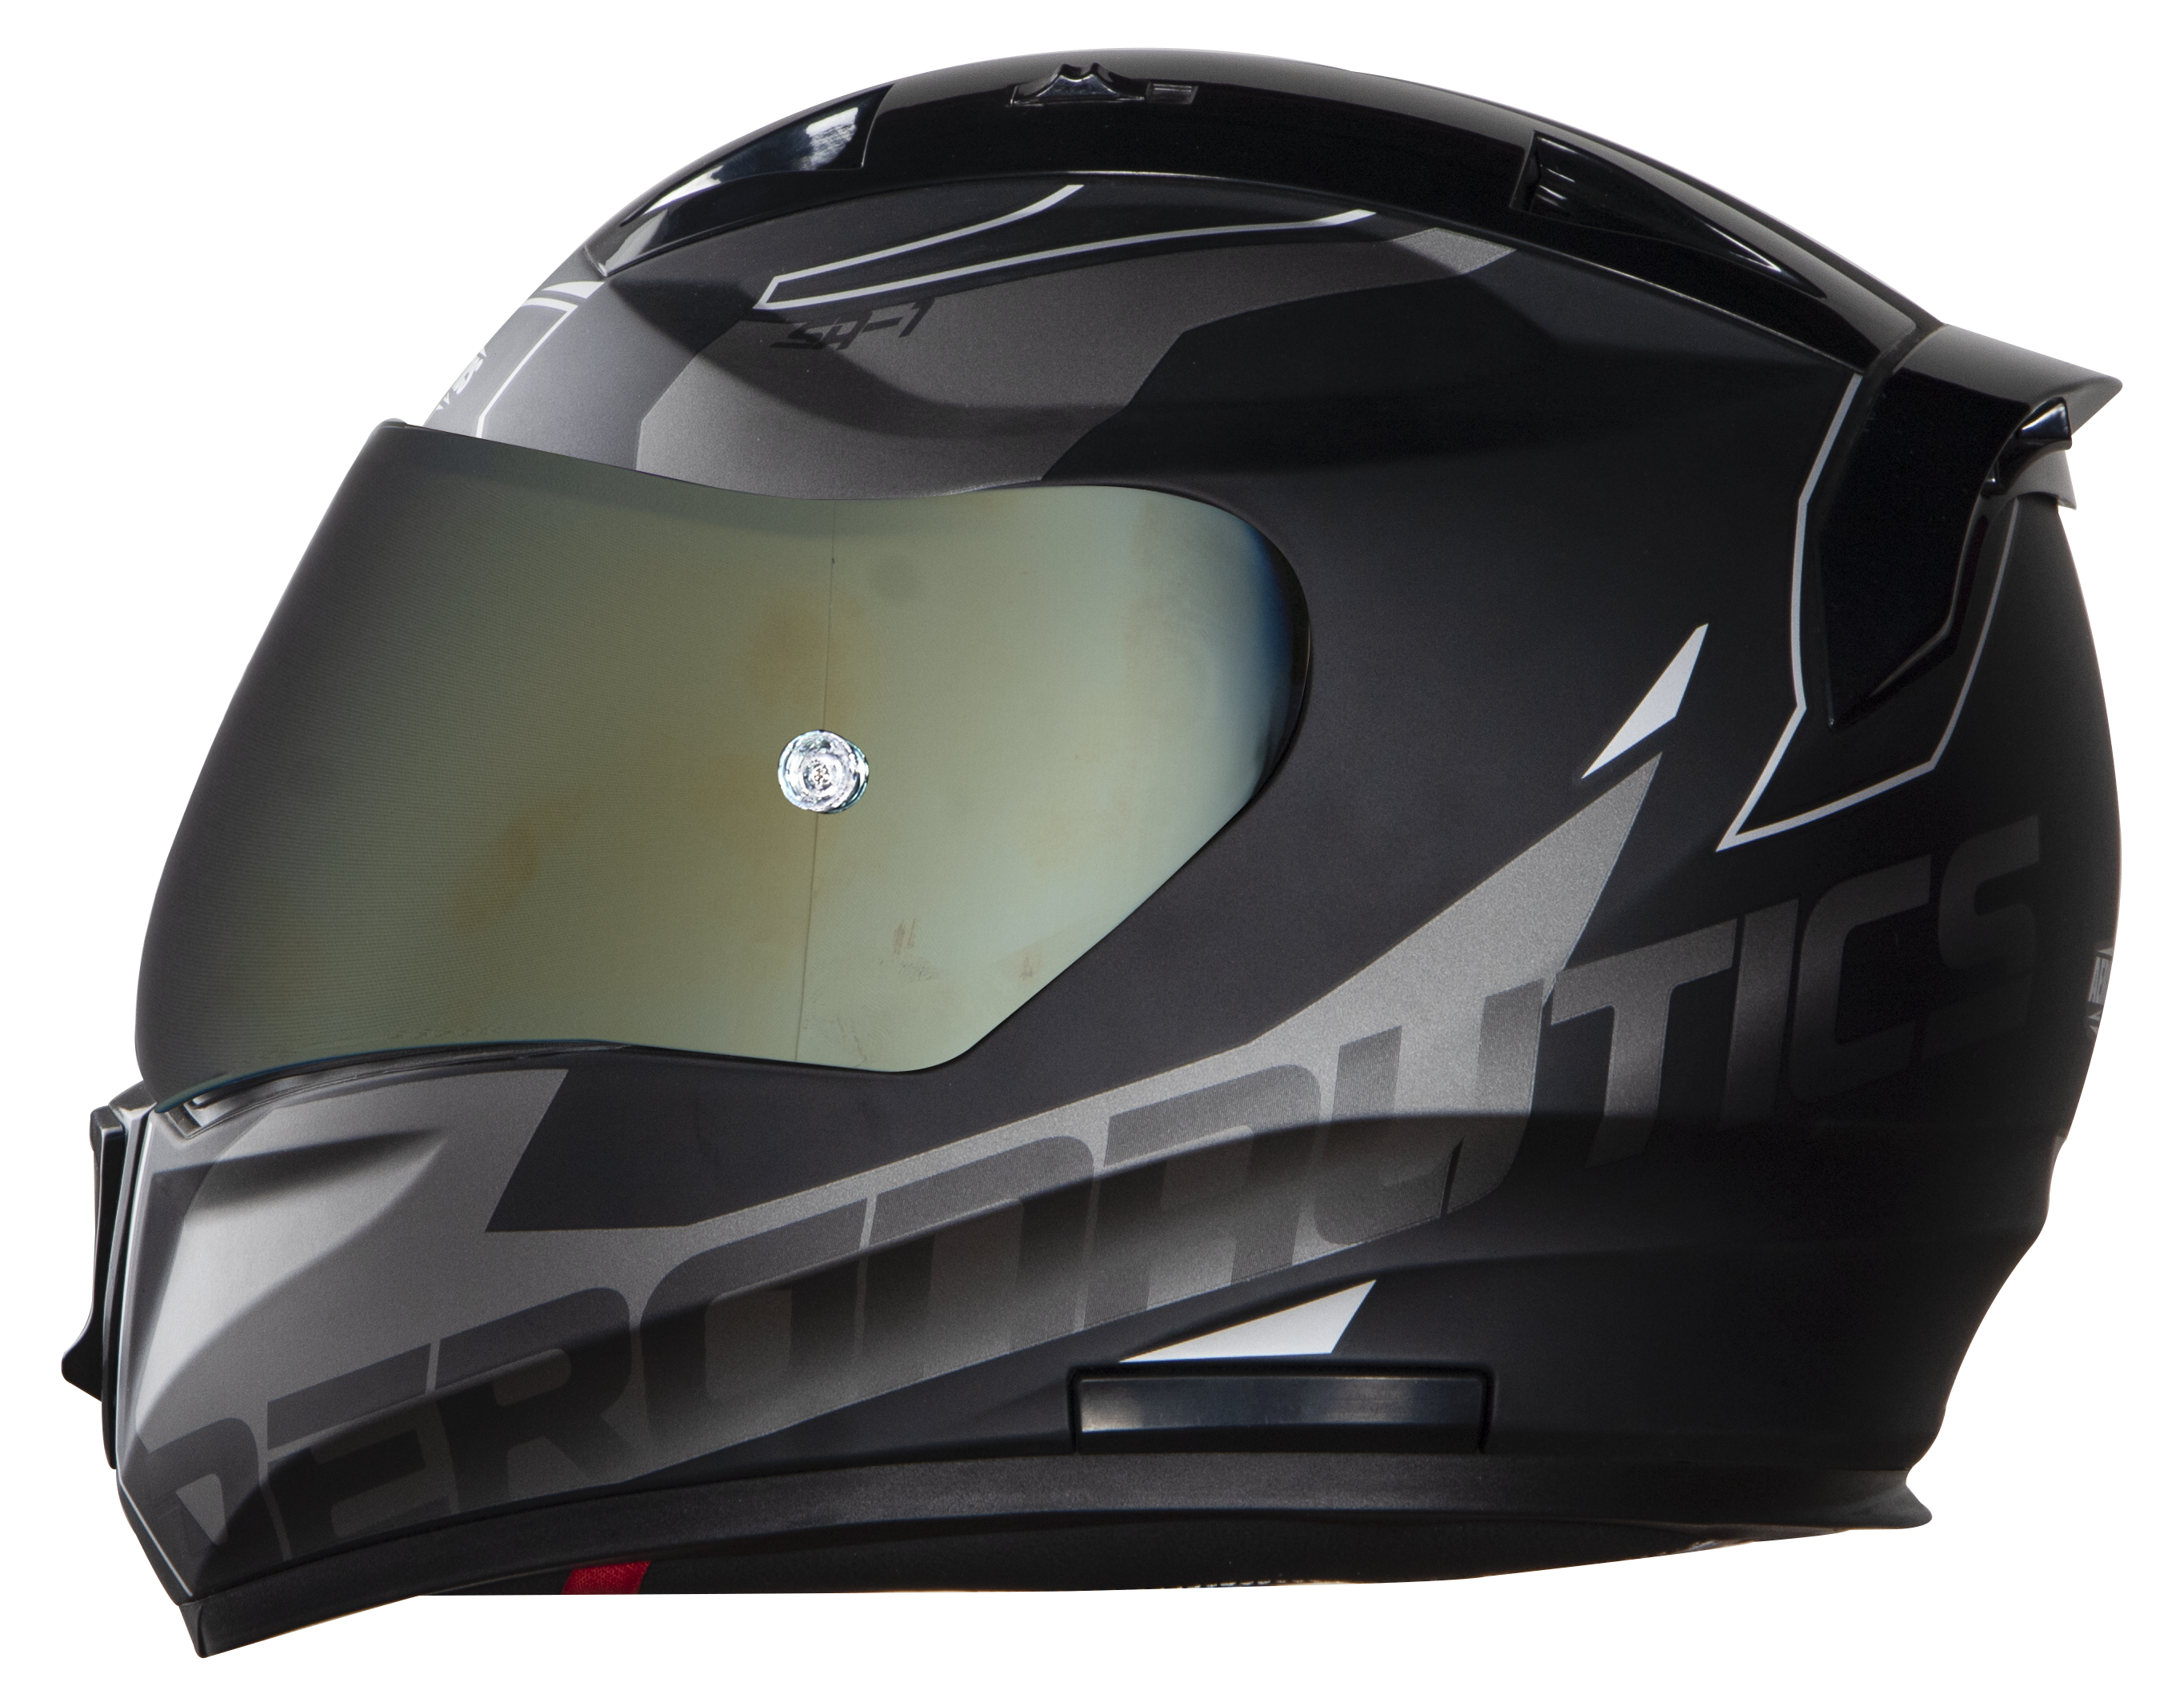 SA-1 RTW Mat Black/White With Anti-Fog Shield Gold Chrome Visor(Fitted With Clear Visor Extra Gold Chrome Anti-Fog Shield Visor Free)